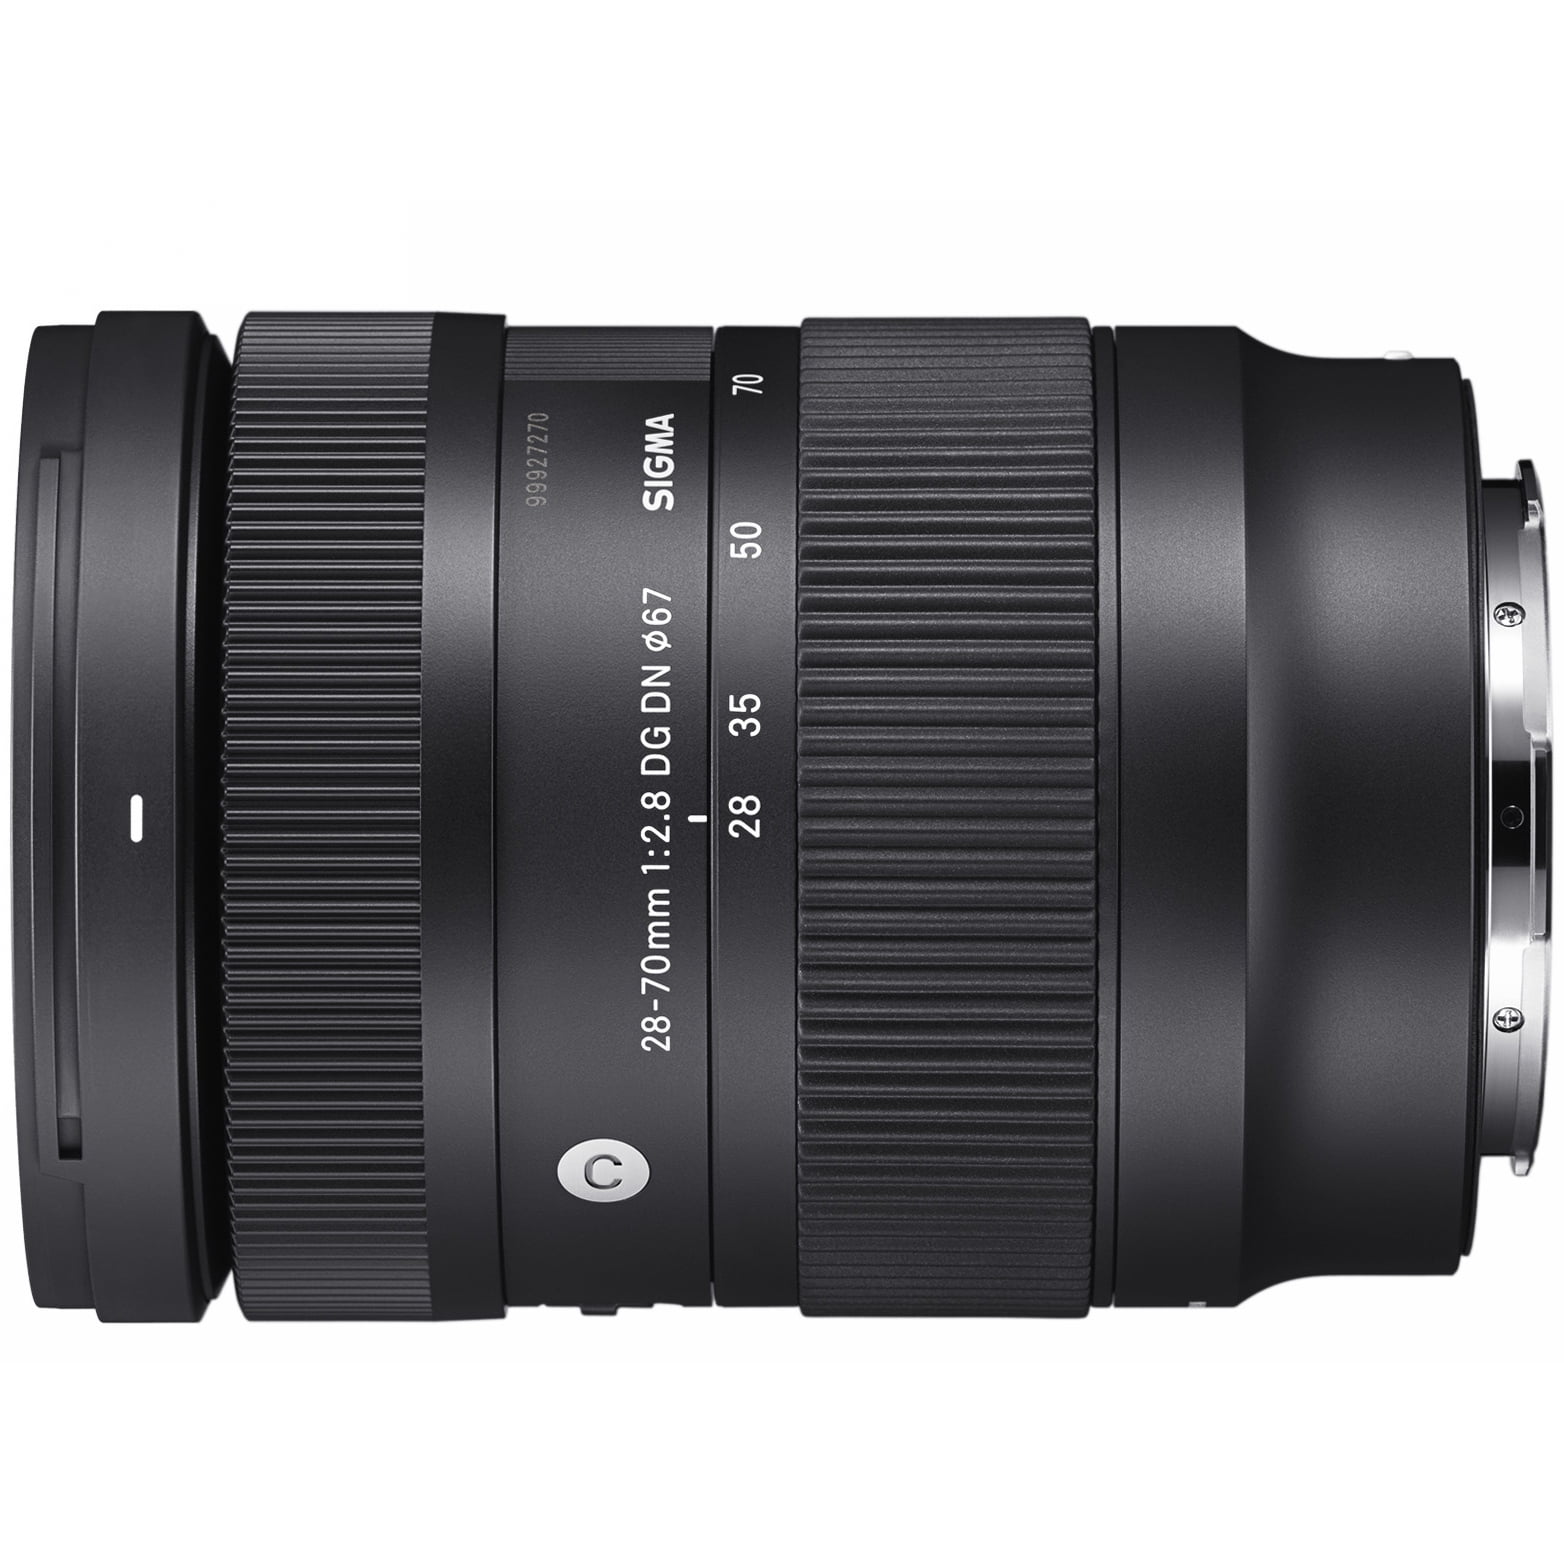 Sigma 28-70mm F2.8 DG DN Contemporary Zoom Lens for Full 